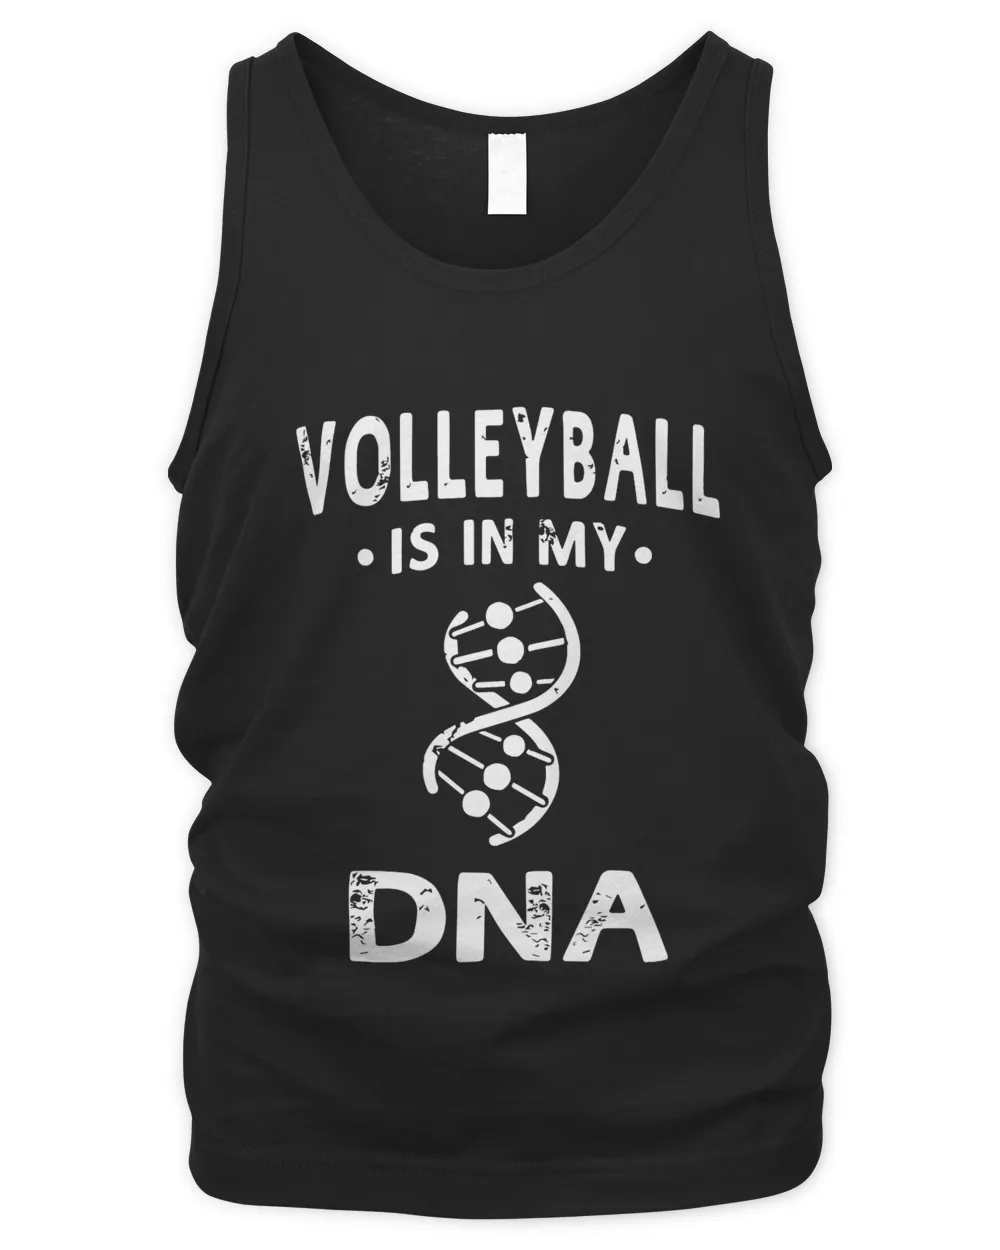 Volleyball DNA Strand Is in My DNA Volleyball Shirt HH220723052